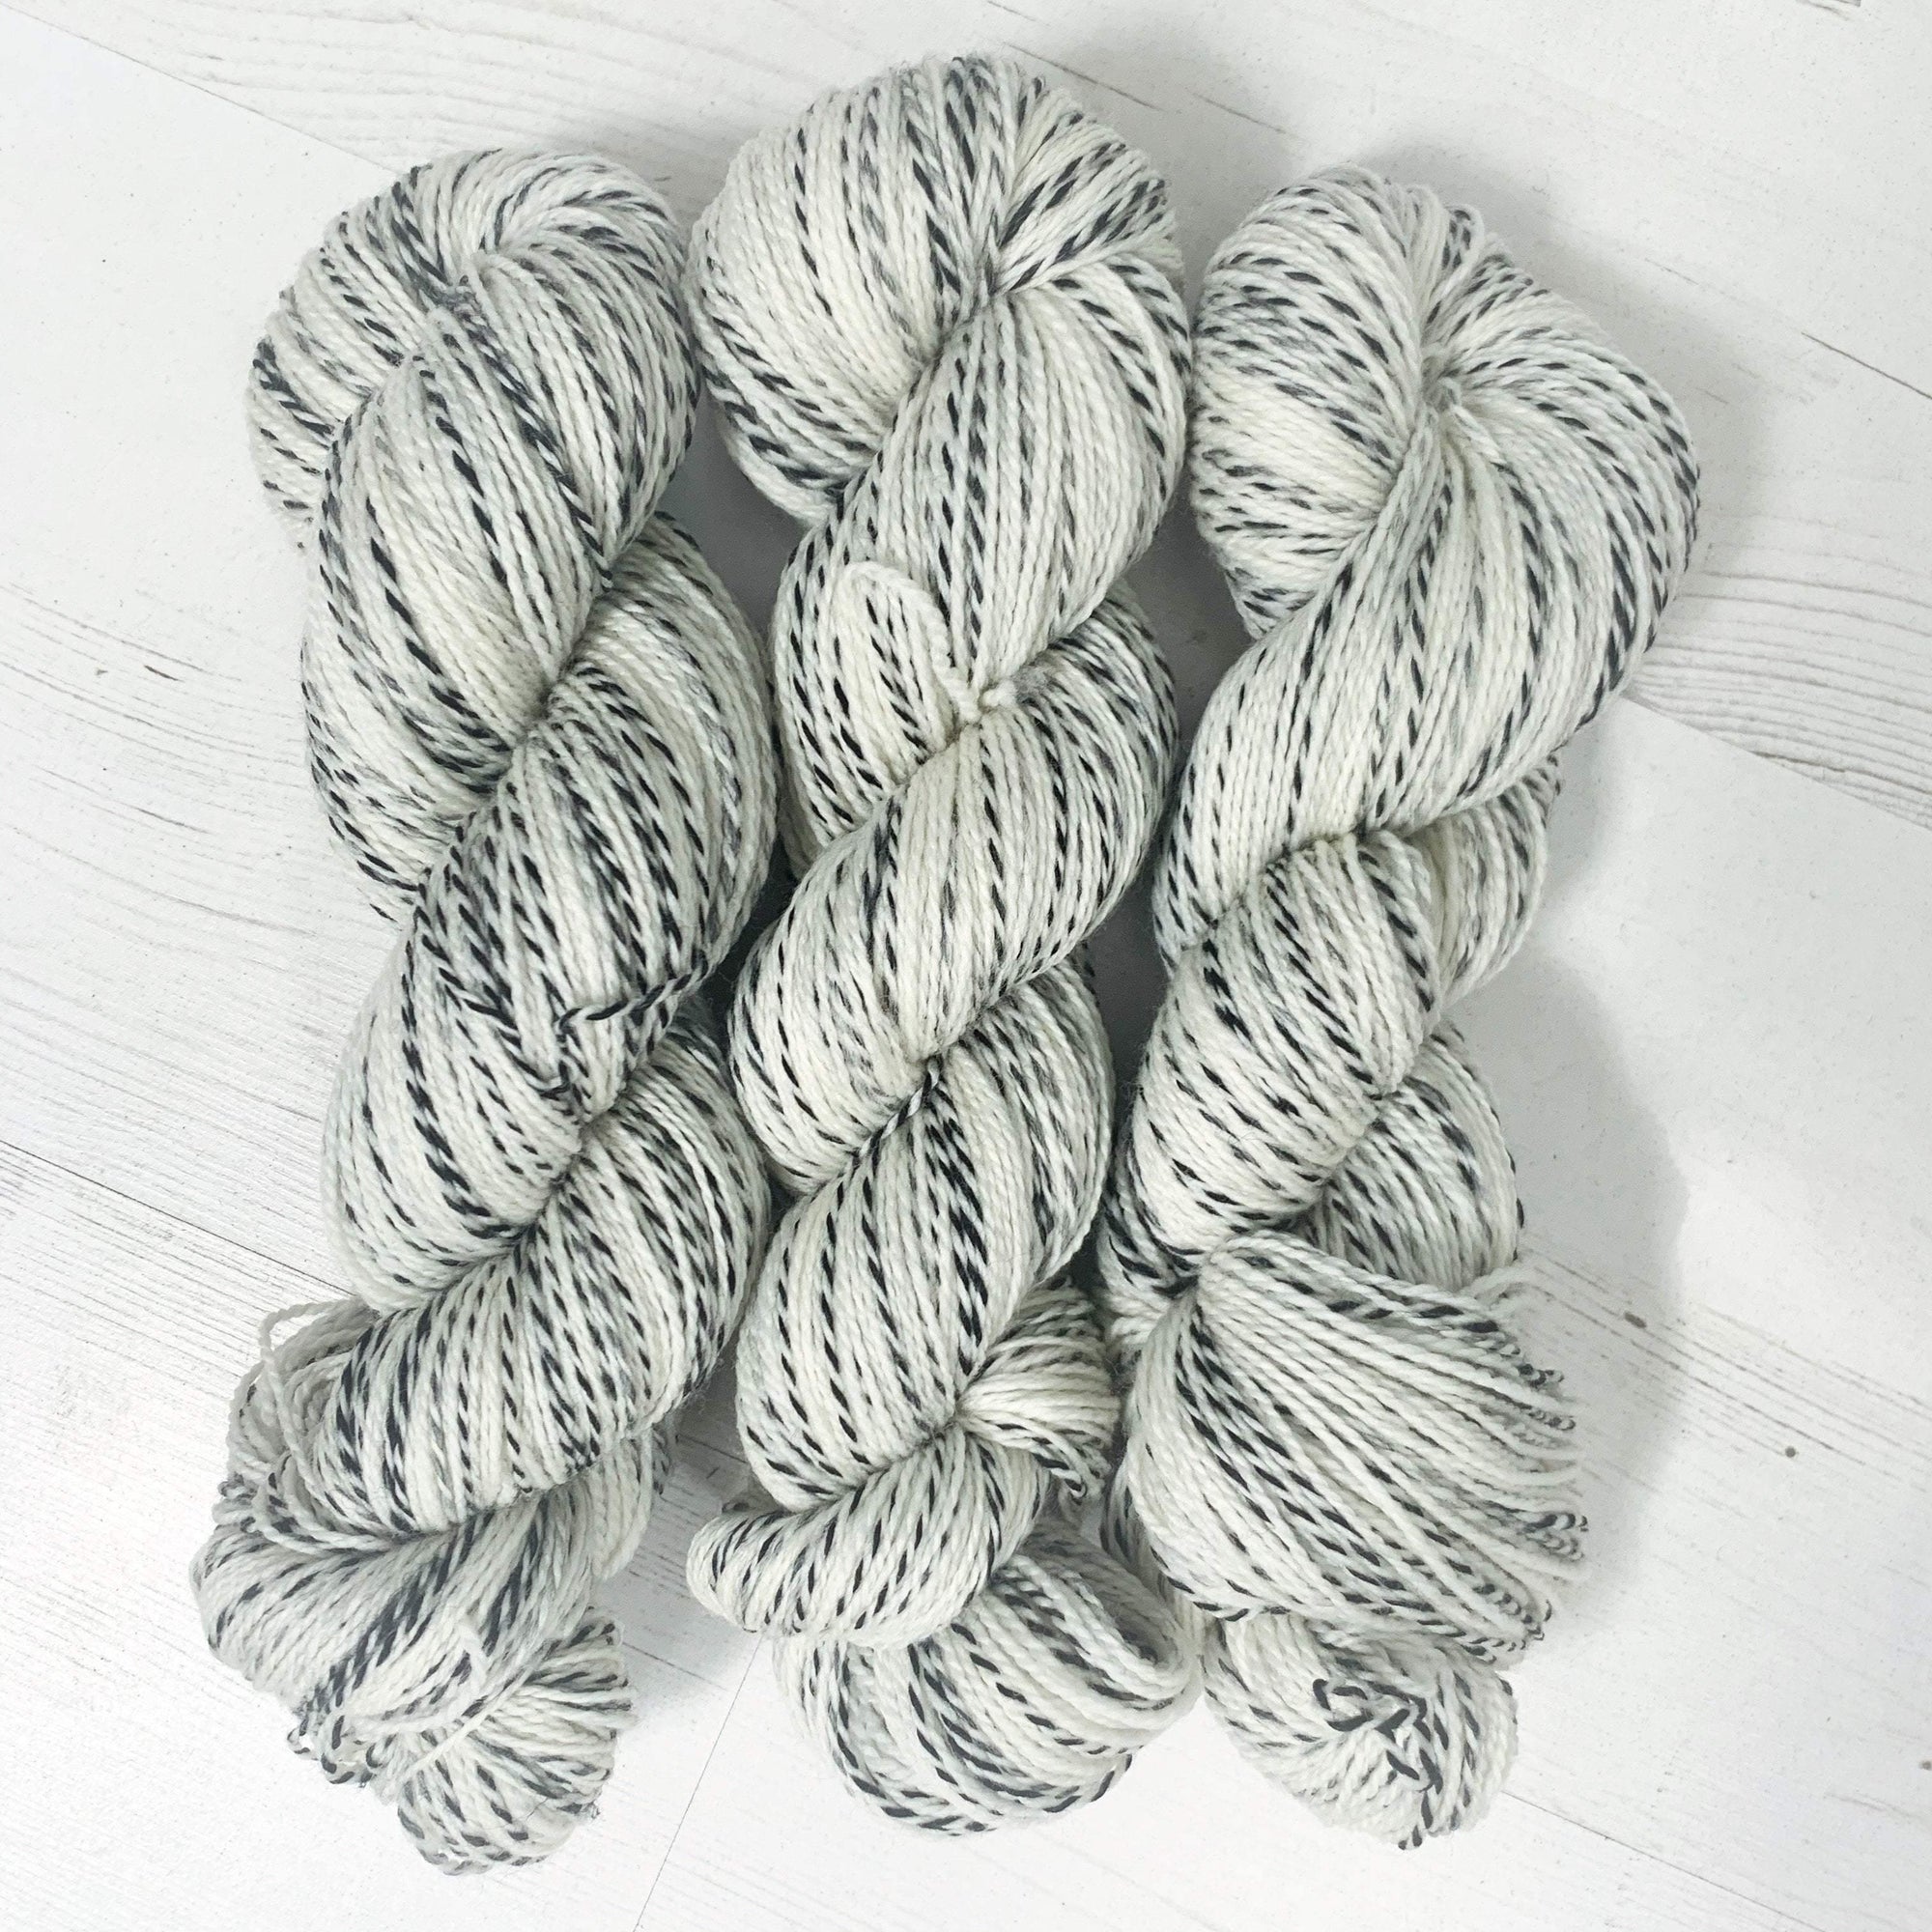 32 ft Natural White Rope,3/8 inch Cotton Rope,4Ply Soft Rope Cord